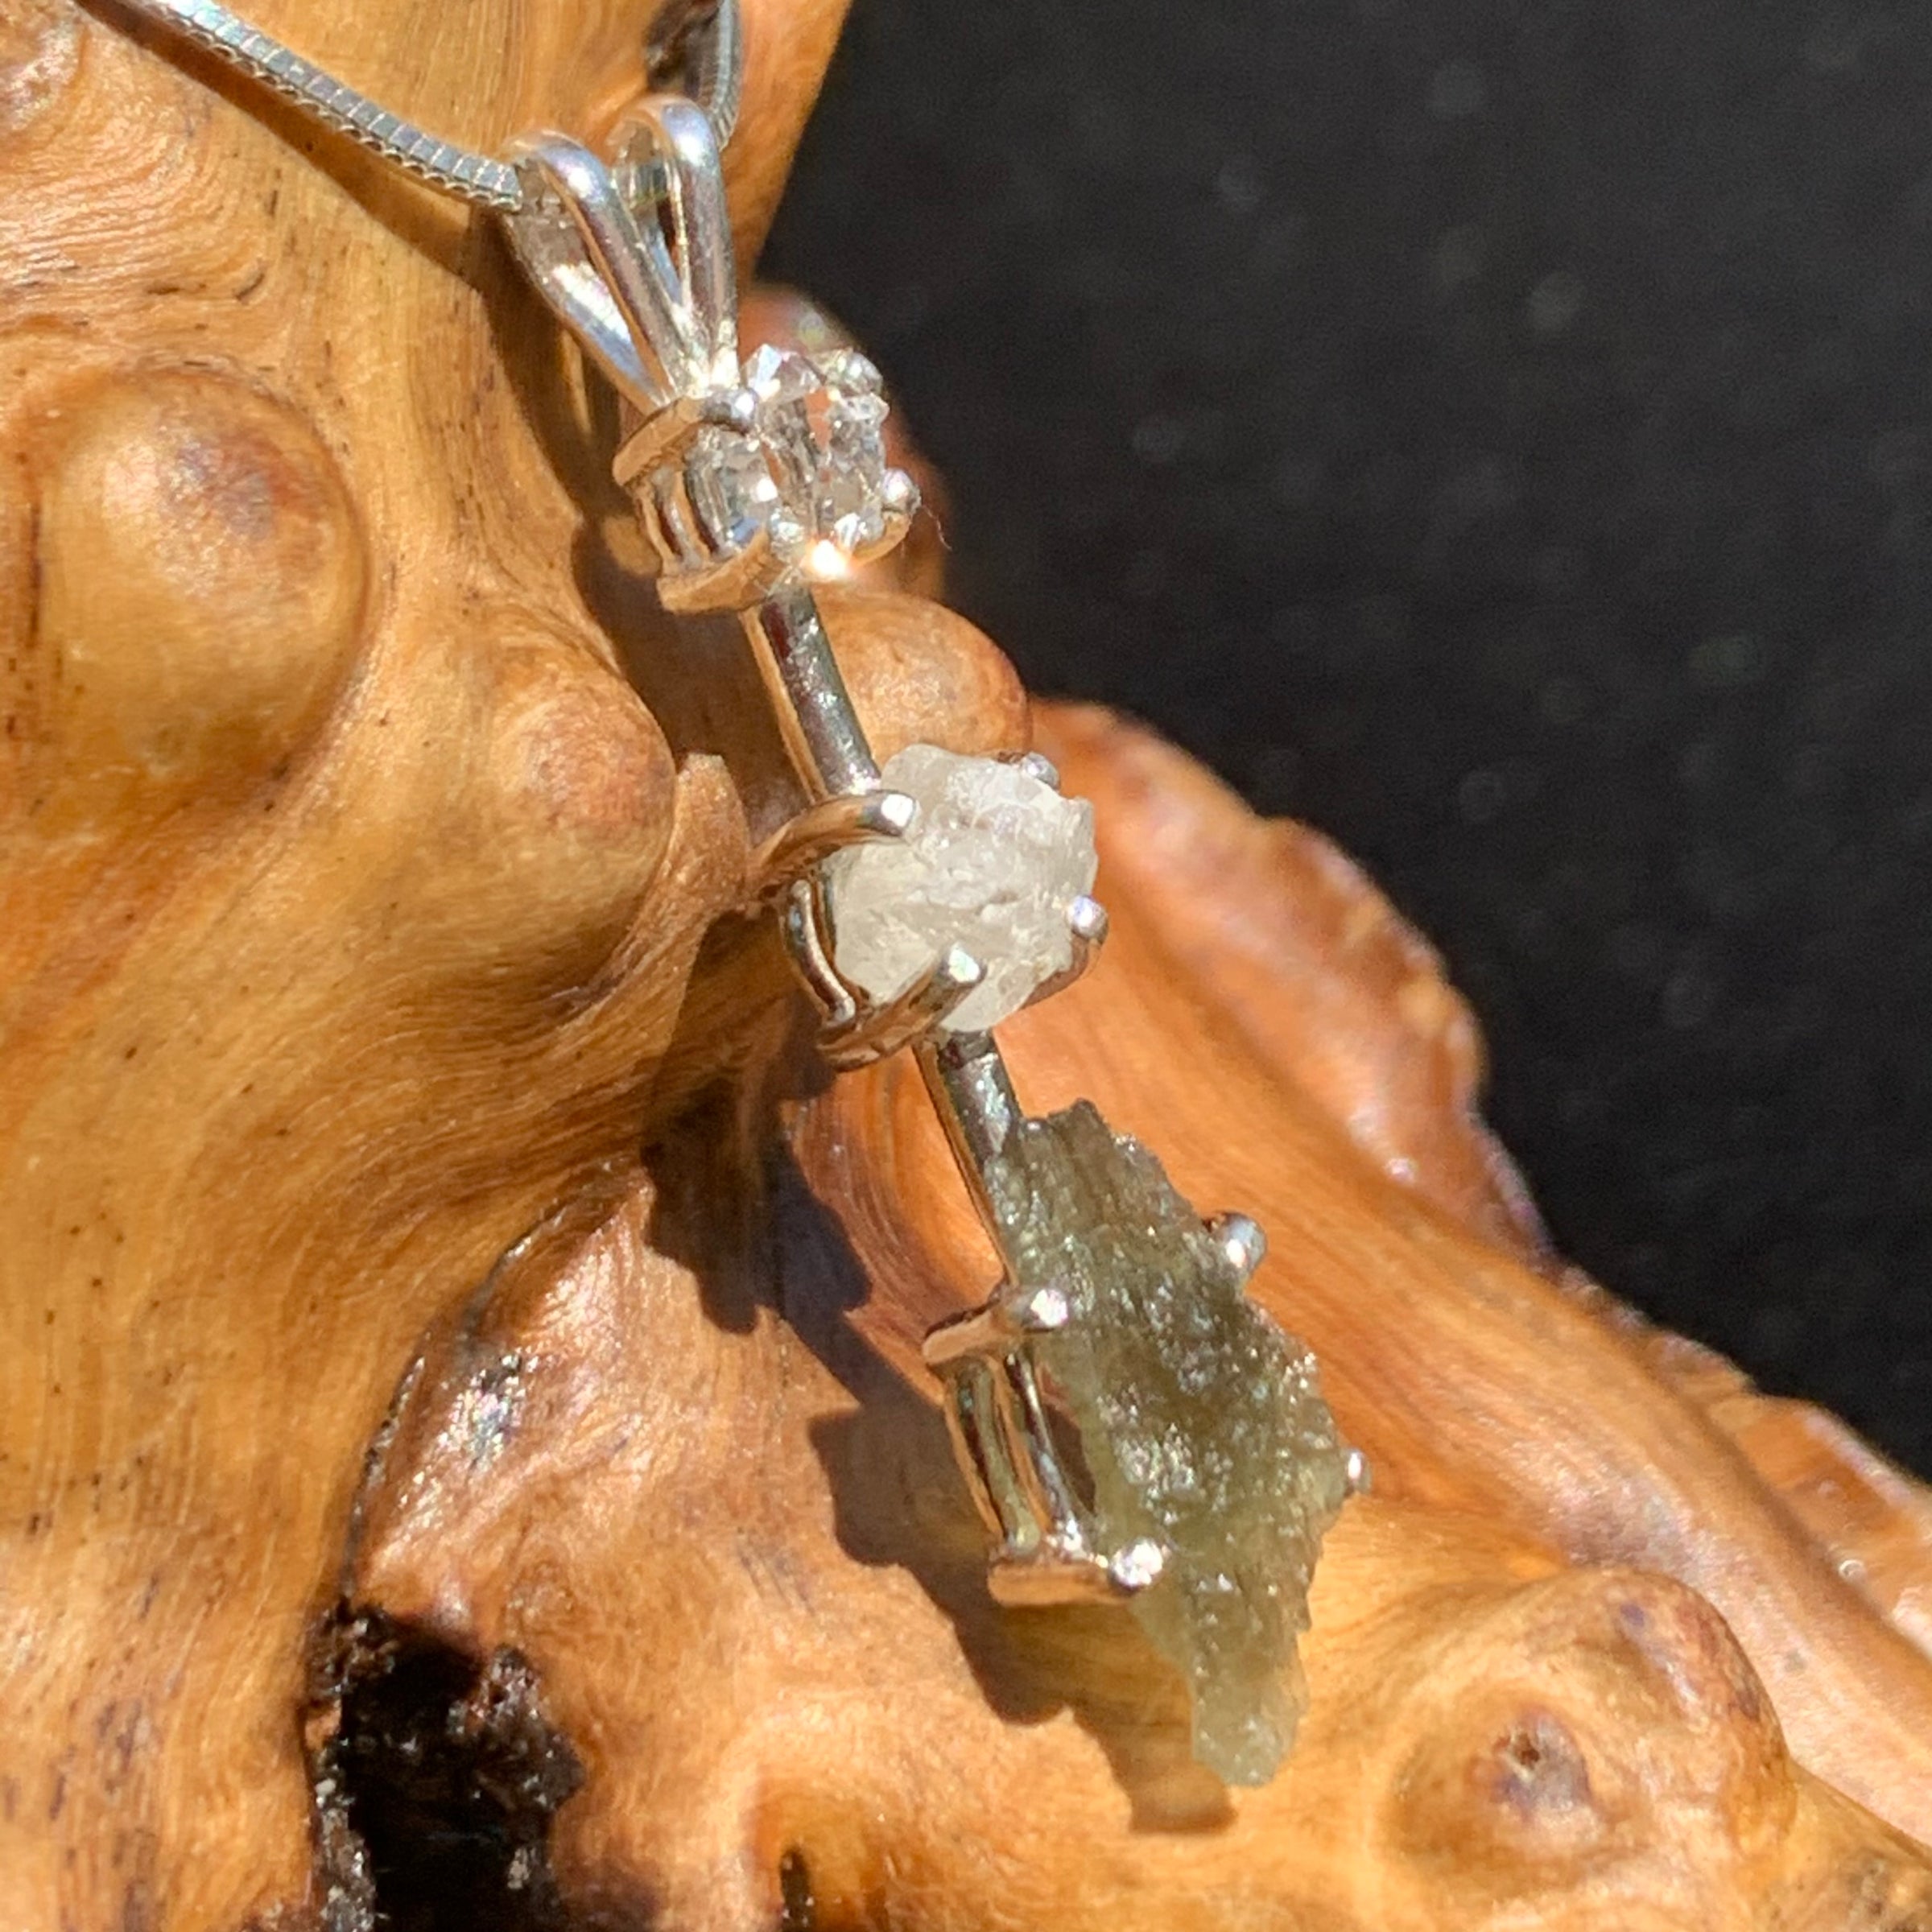 sterling silver pendant necklace with Herkimer diamond, moldavite, and phenacite sitting on driftwood for display